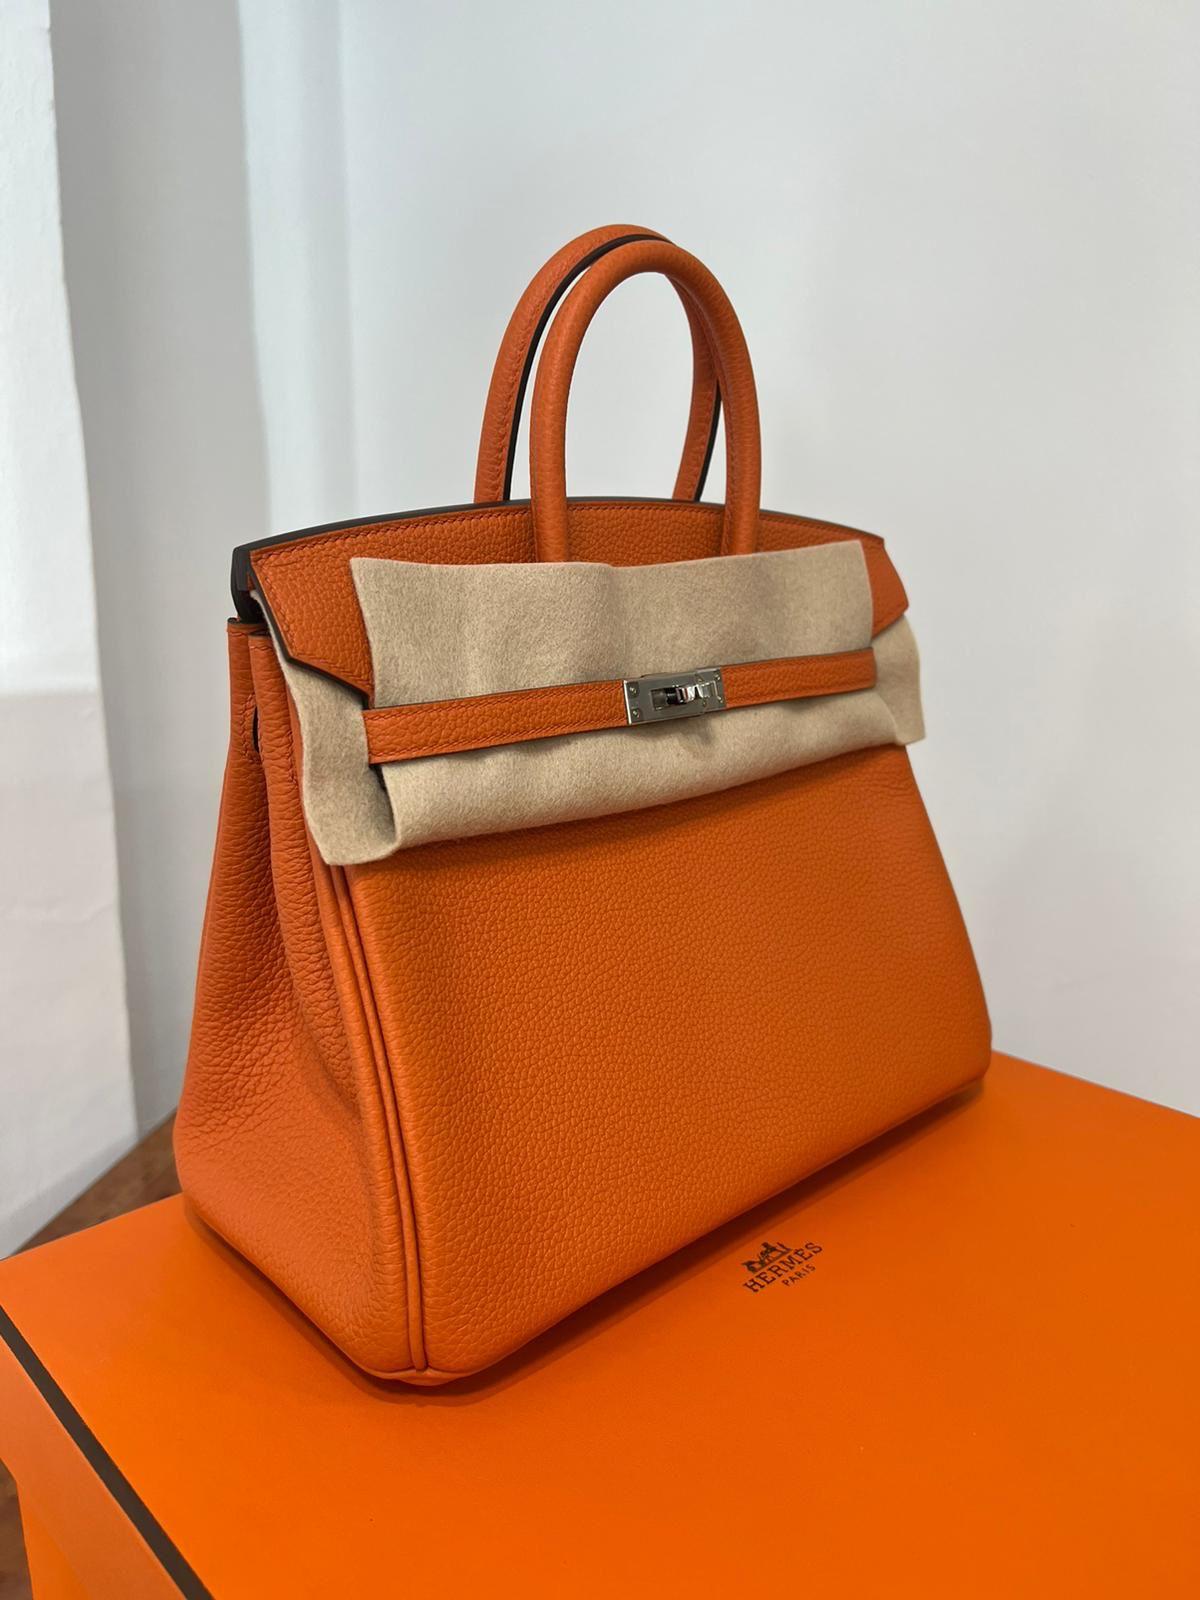 Hermès
2022 Hermès Birkin 25 Orange Togo Leather Gold Tone Hardware
New Never used. Rest of Boutique Stock.

Width: 25 cm
Height: 20 cm
Depth: 13 cm

Will be delivered in its Hermes original dust bag
About the Design
Since its 1984 debut, the Birkin